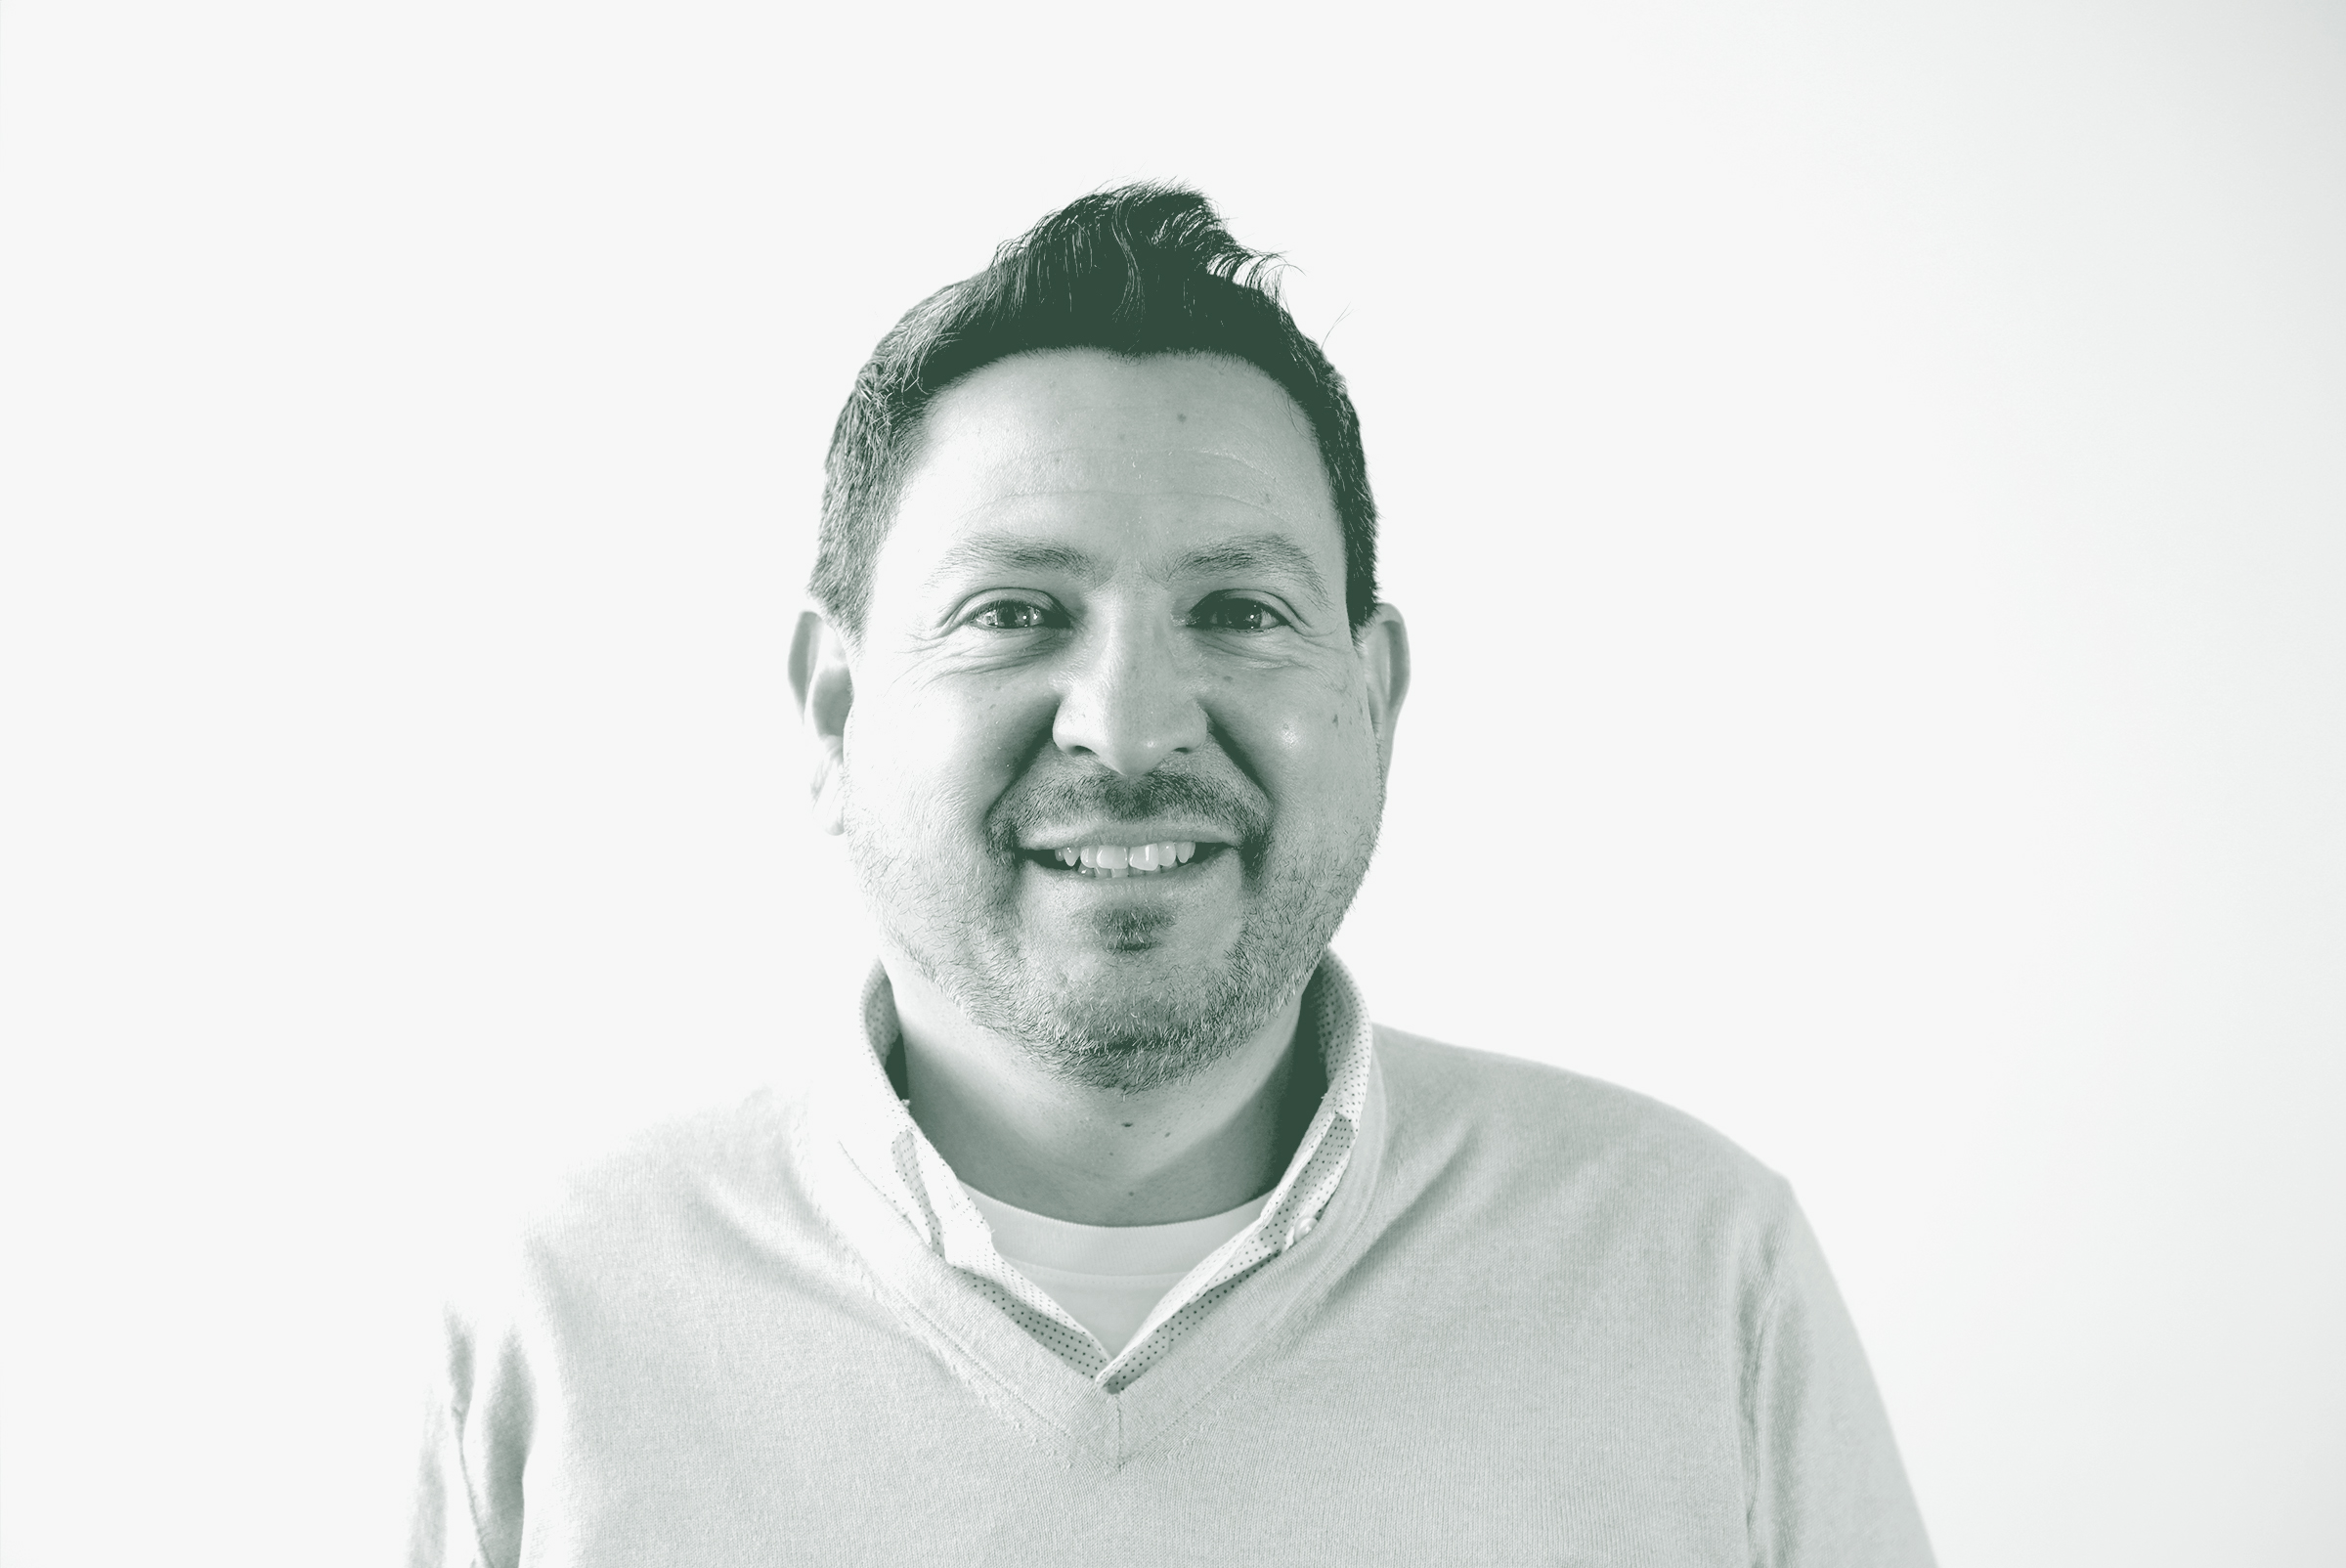 A black and white portrait of Eric Marquez de la Plata, a Senior Project Leader with GFF in the Retail Studio, in front of a white background.